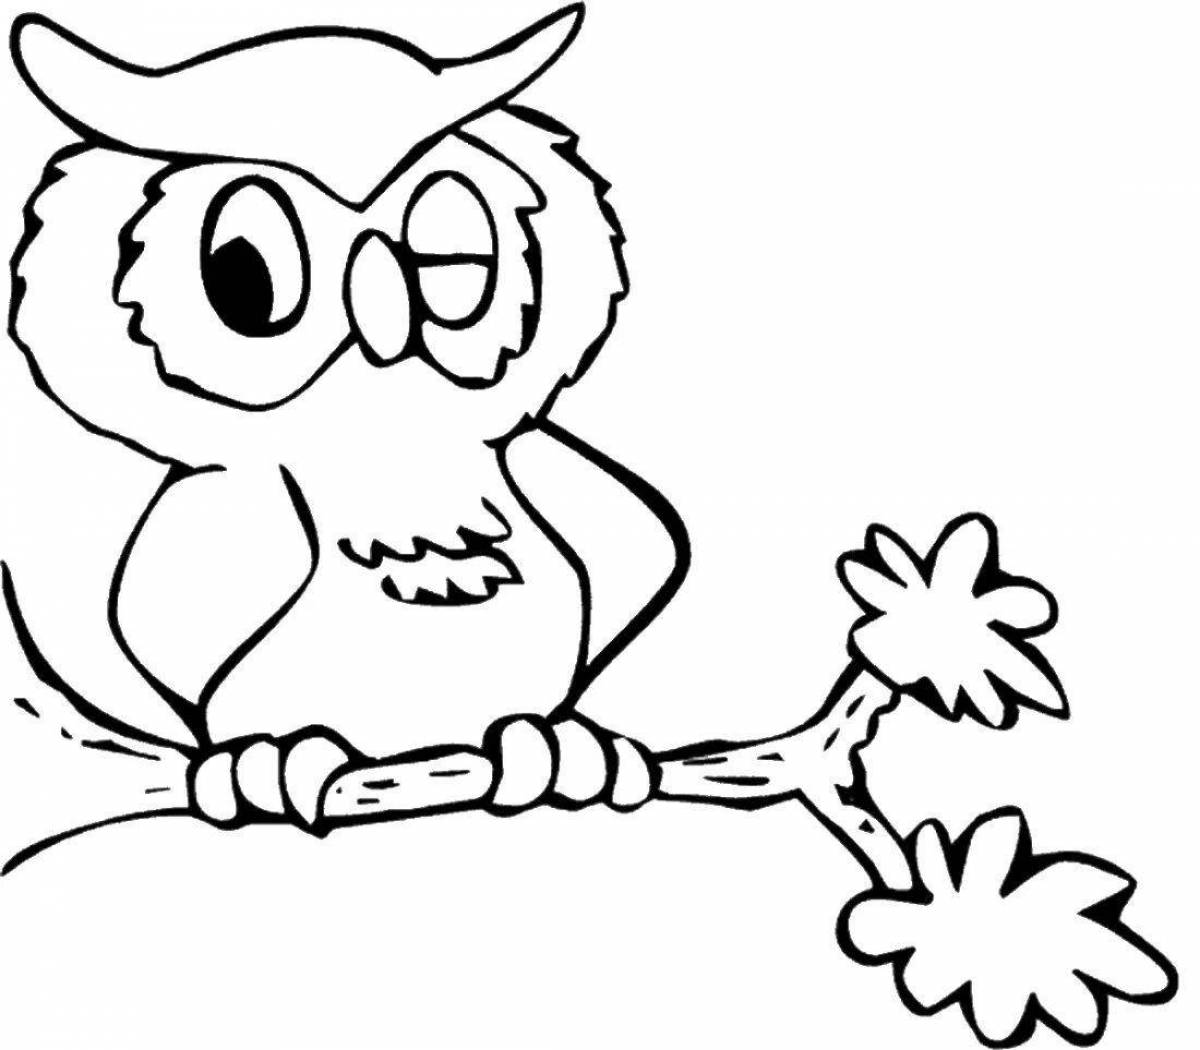 Funny coloring drawing of an owl